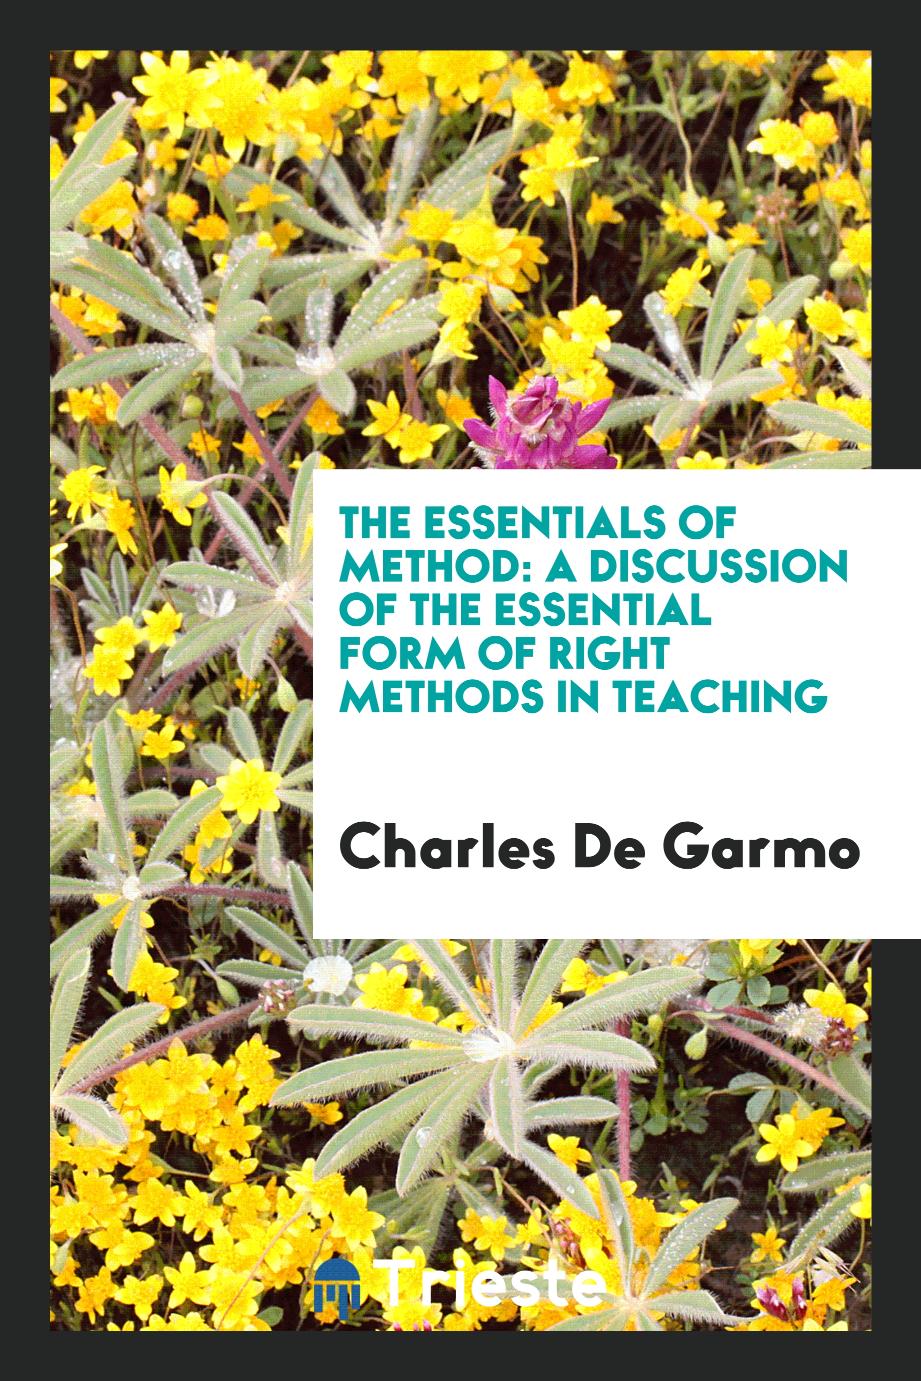 The Essentials of Method: A Discussion of the Essential Form of Right Methods in Teaching